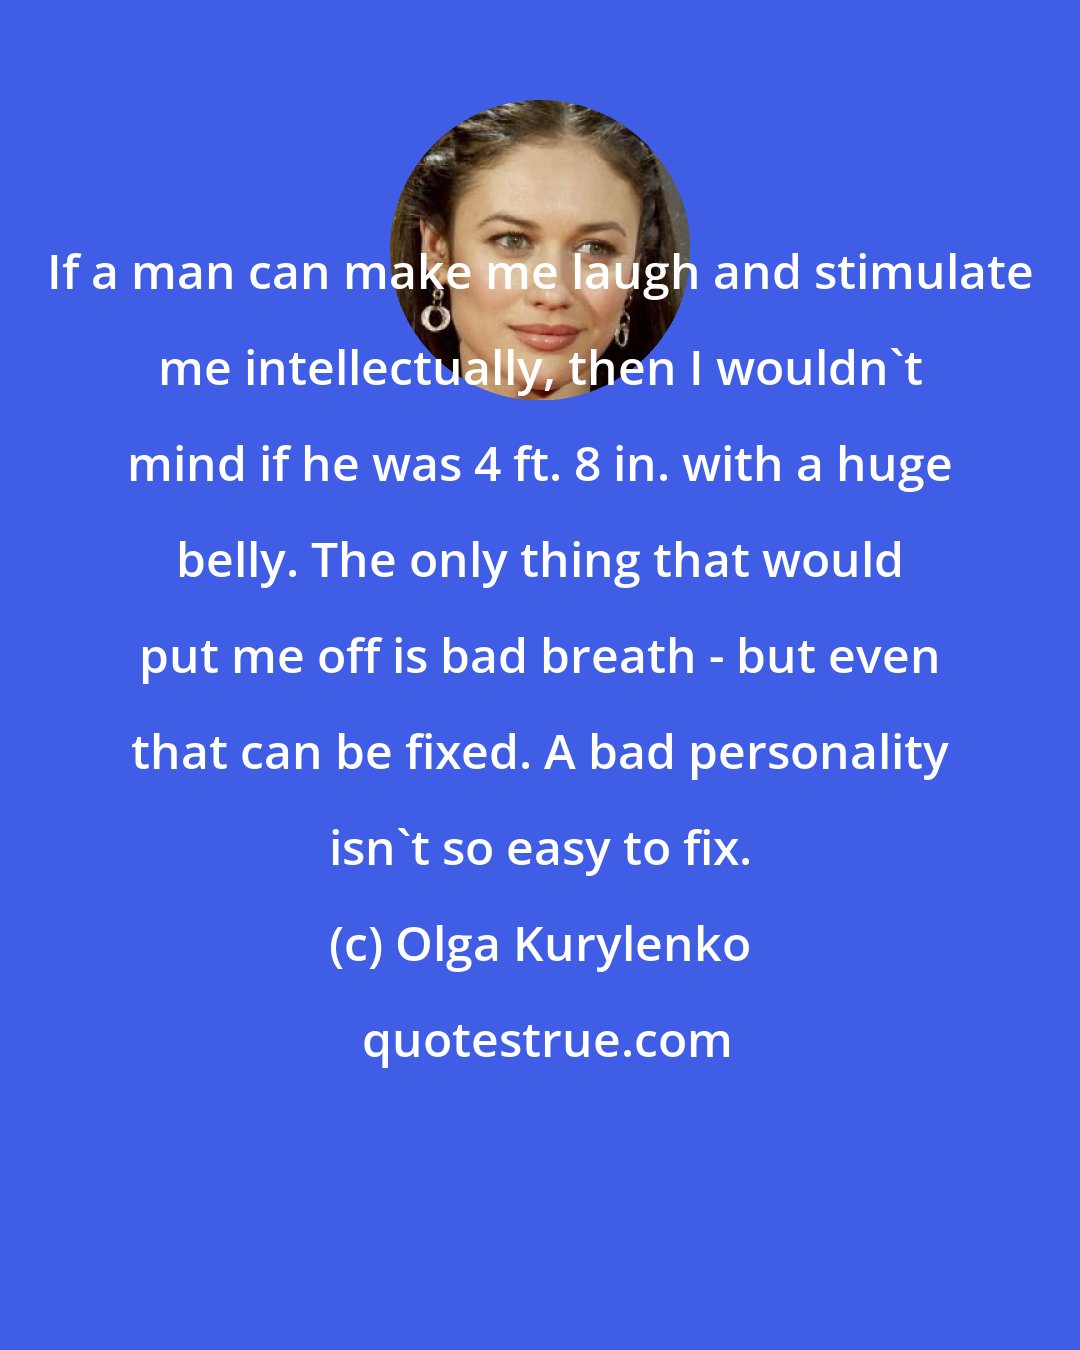 Olga Kurylenko: If a man can make me laugh and stimulate me intellectually, then I wouldn't mind if he was 4 ft. 8 in. with a huge belly. The only thing that would put me off is bad breath - but even that can be fixed. A bad personality isn't so easy to fix.